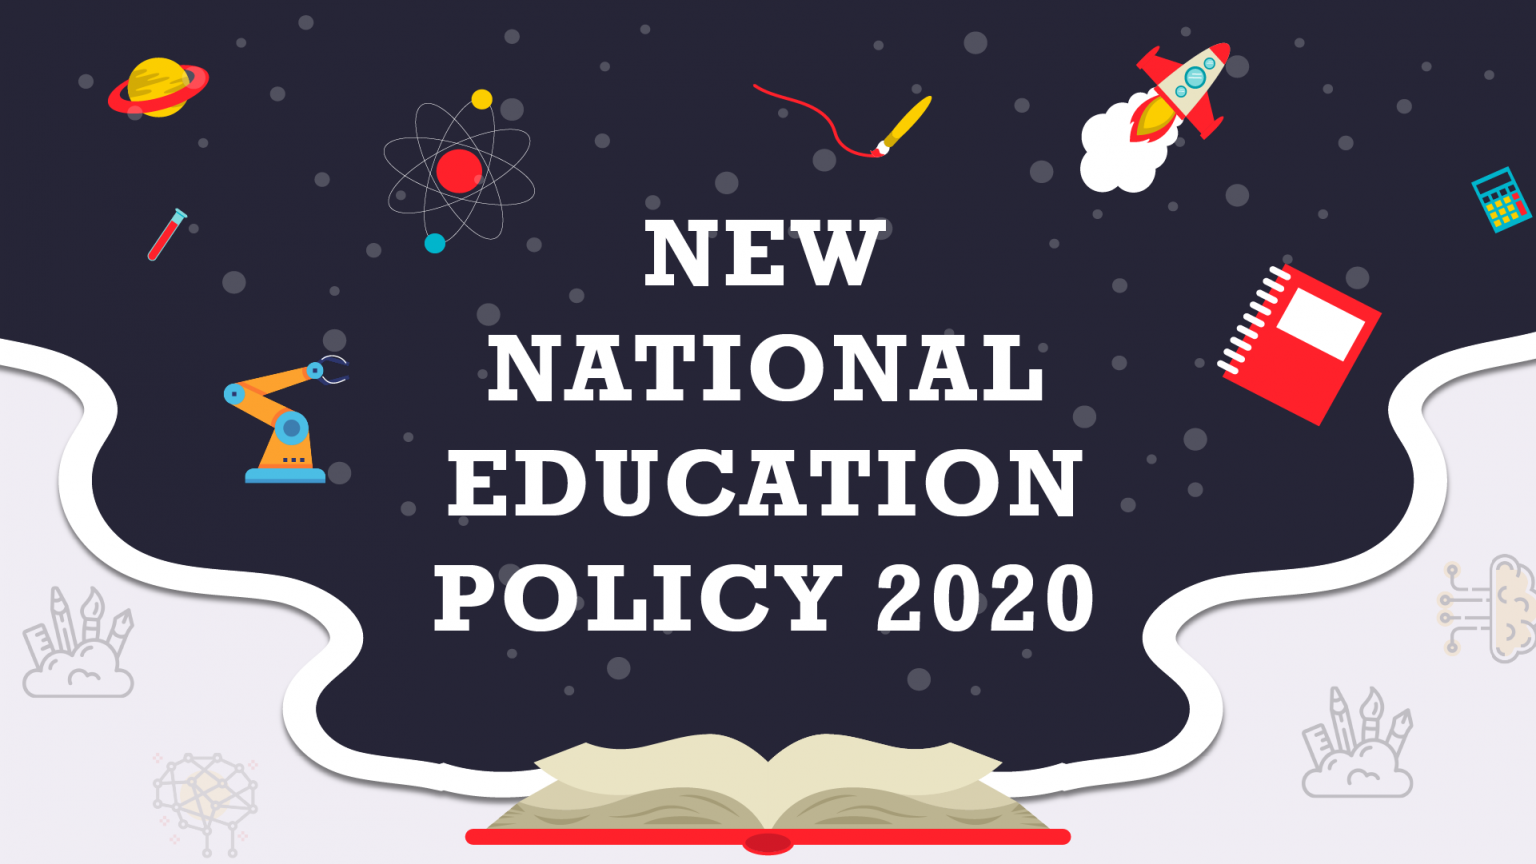 powerpoint presentation on new education policy 2020